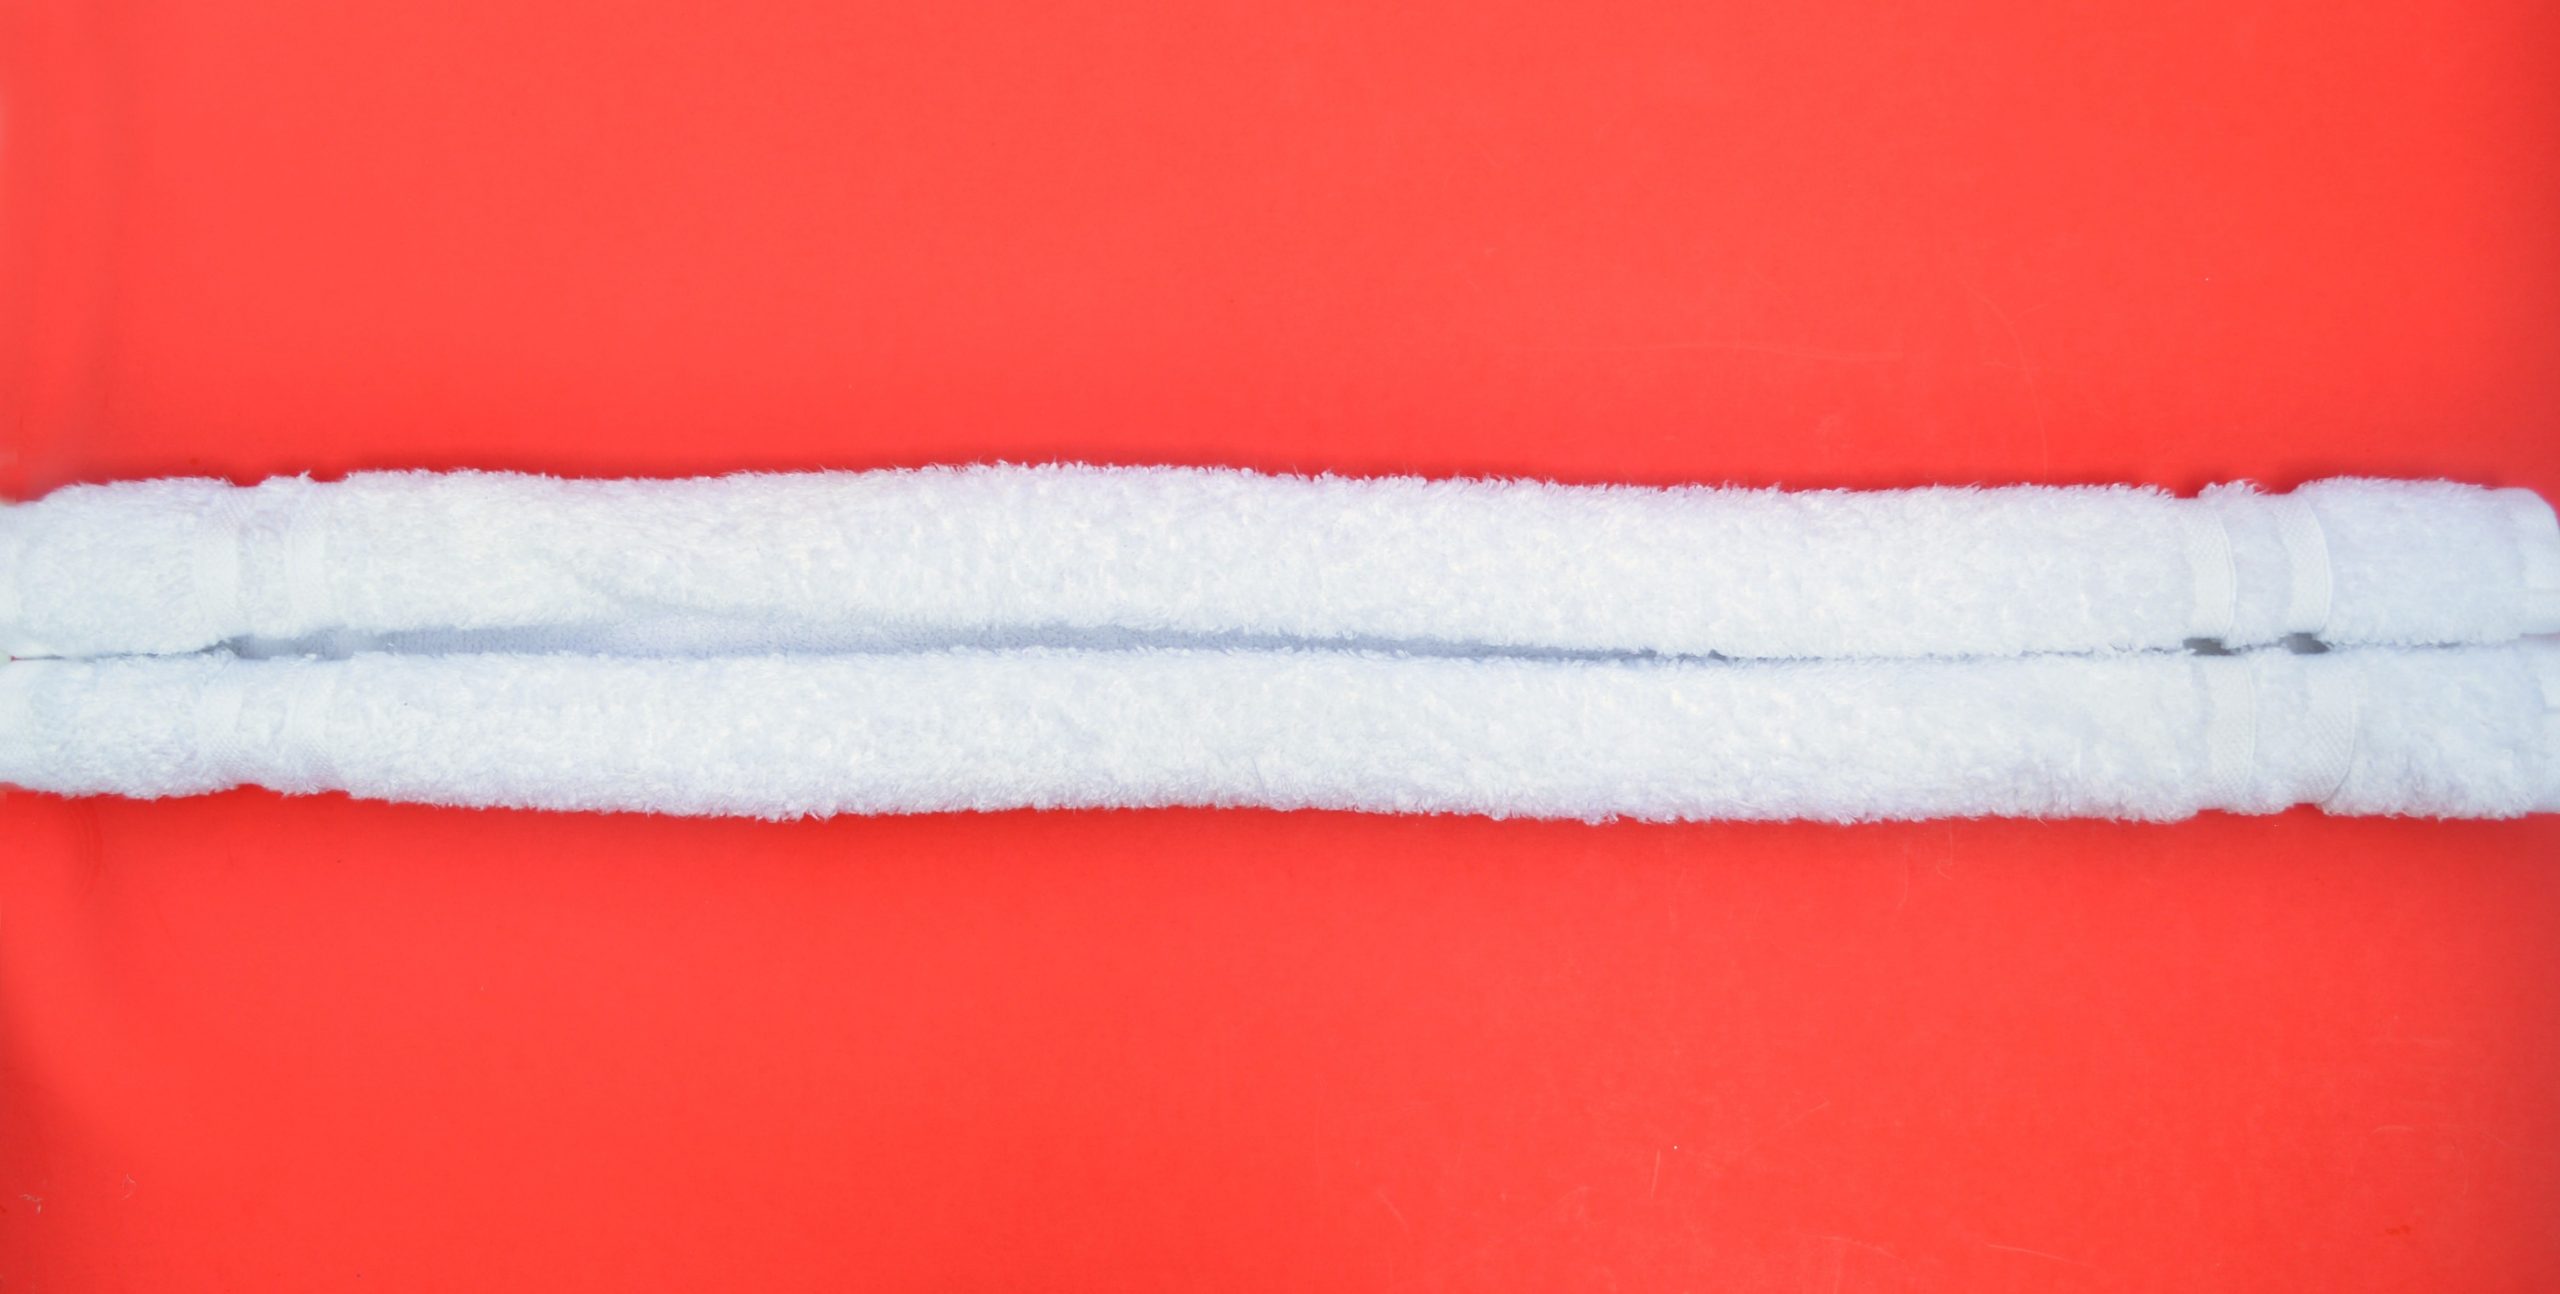 rolled white towel on a red background